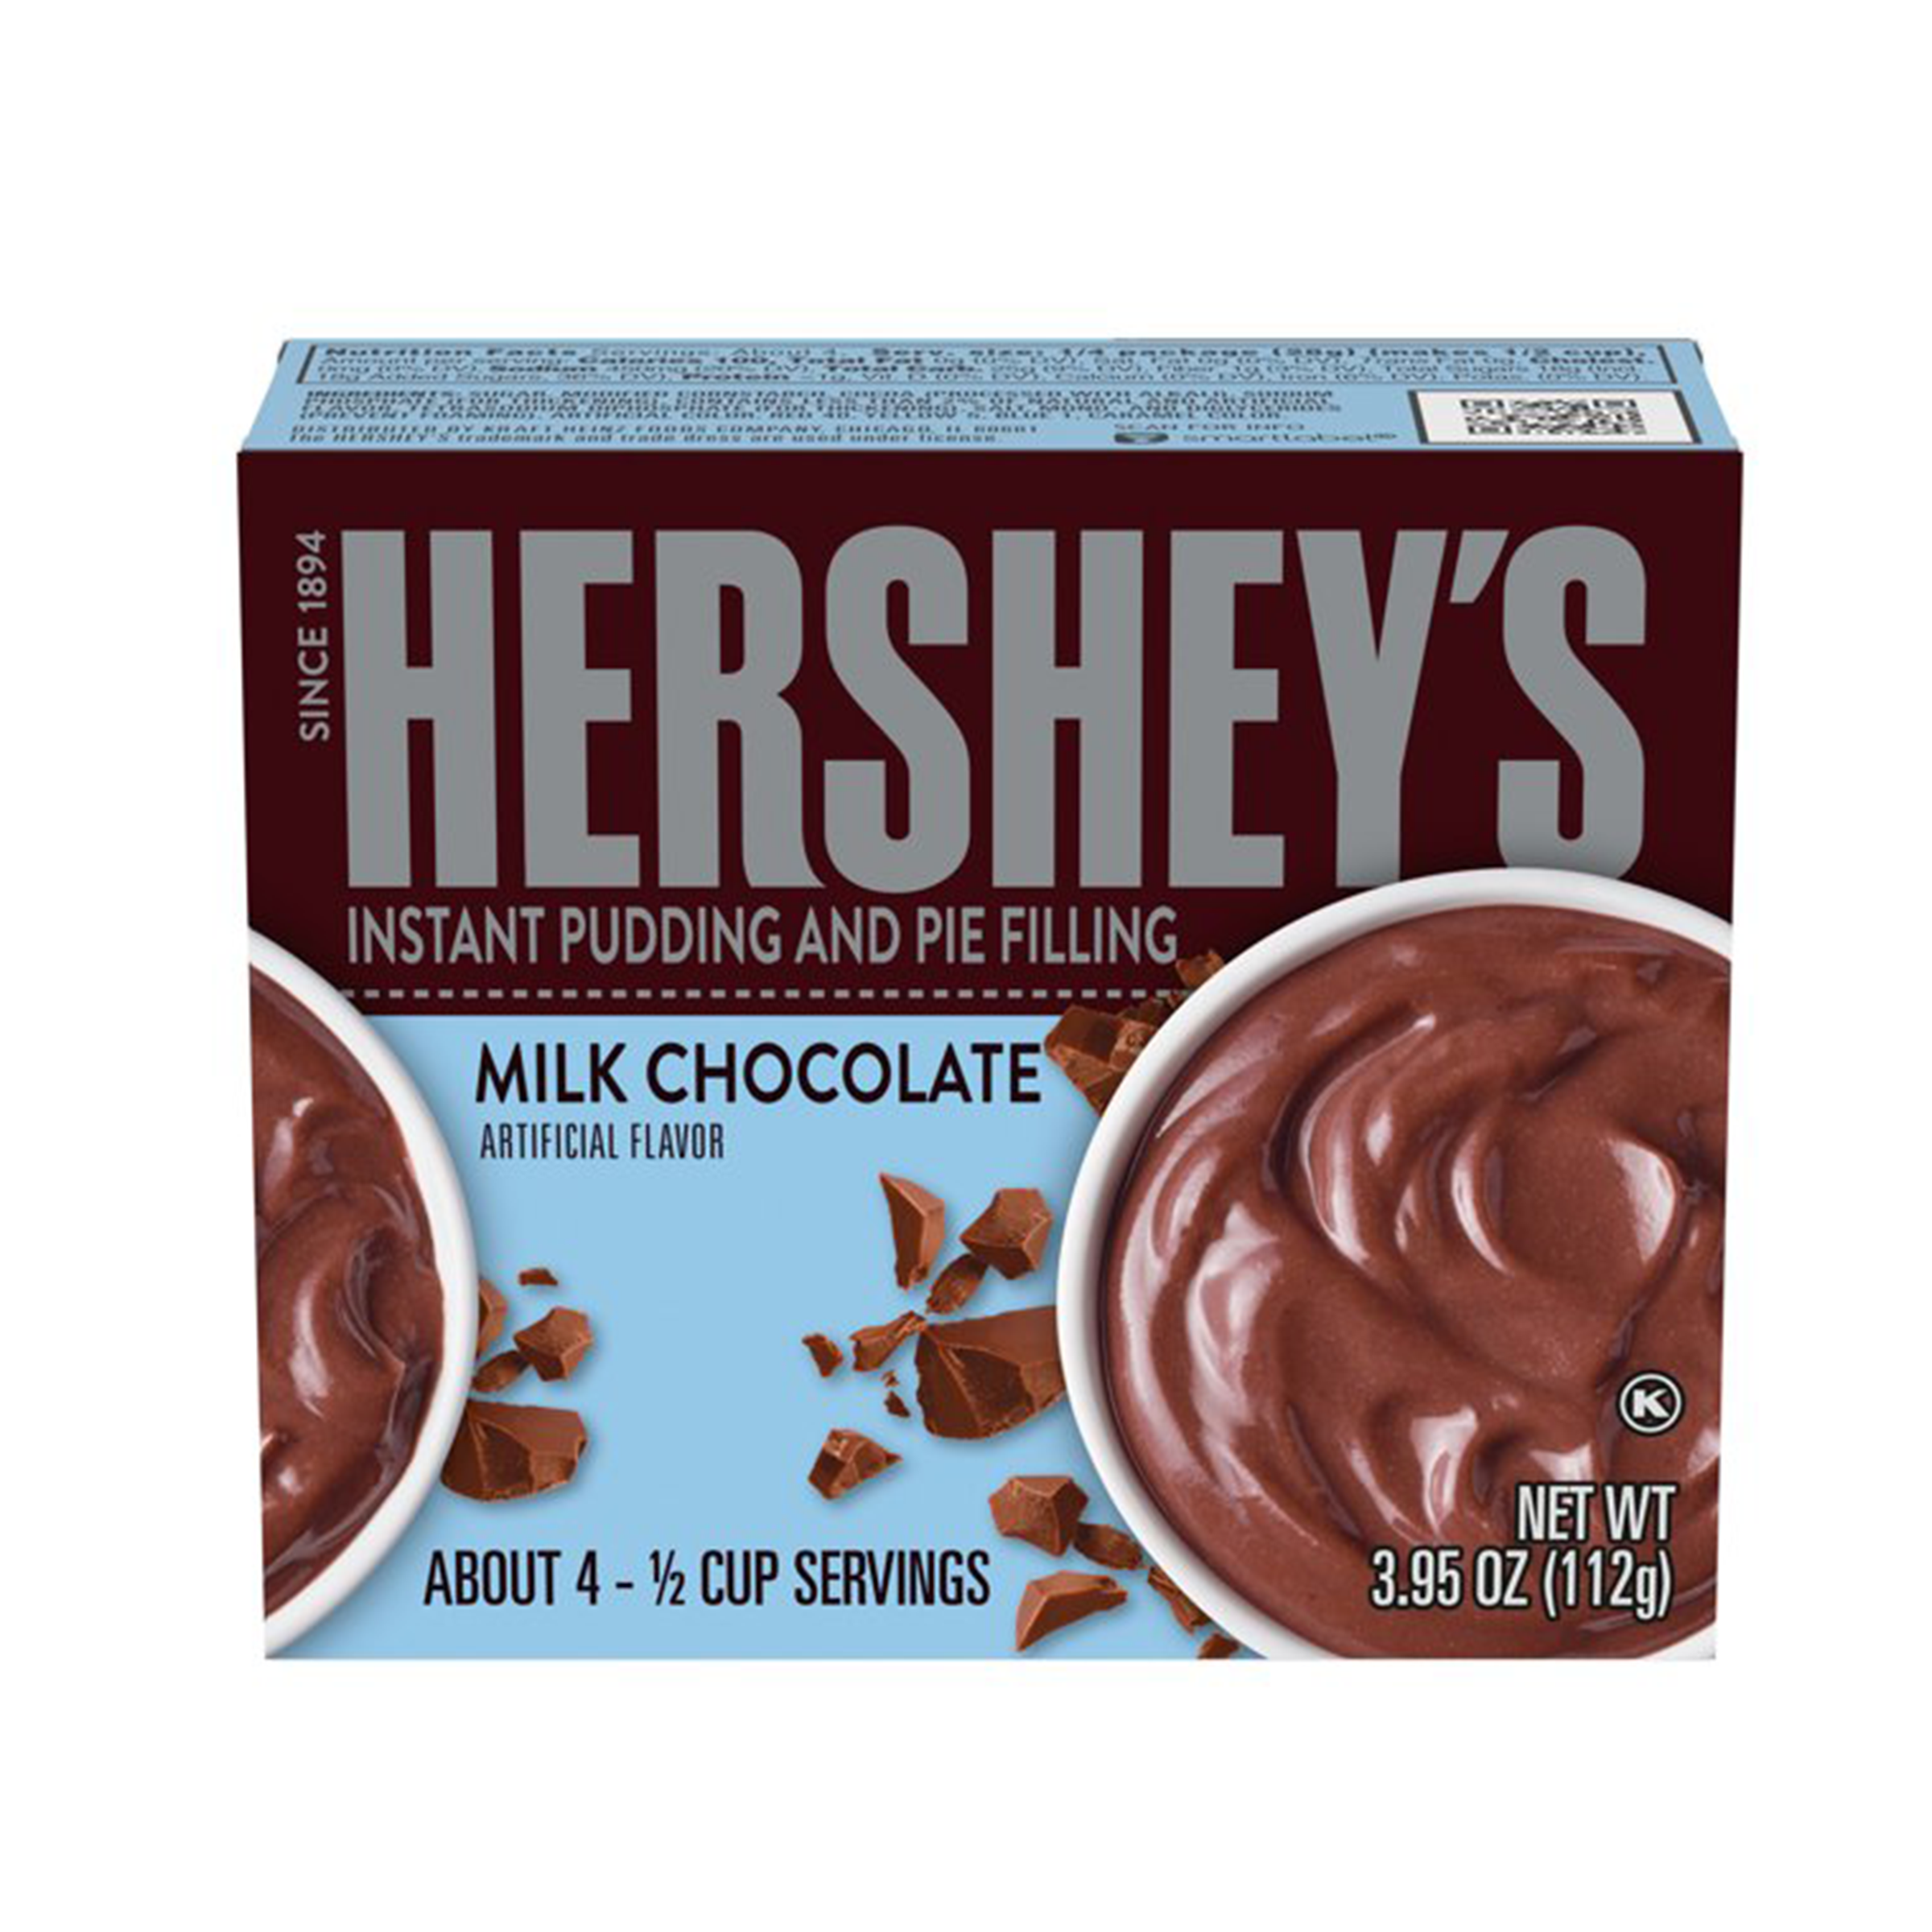 Hershey's Chocolate - Instant Pudding & Pie Filling Mix